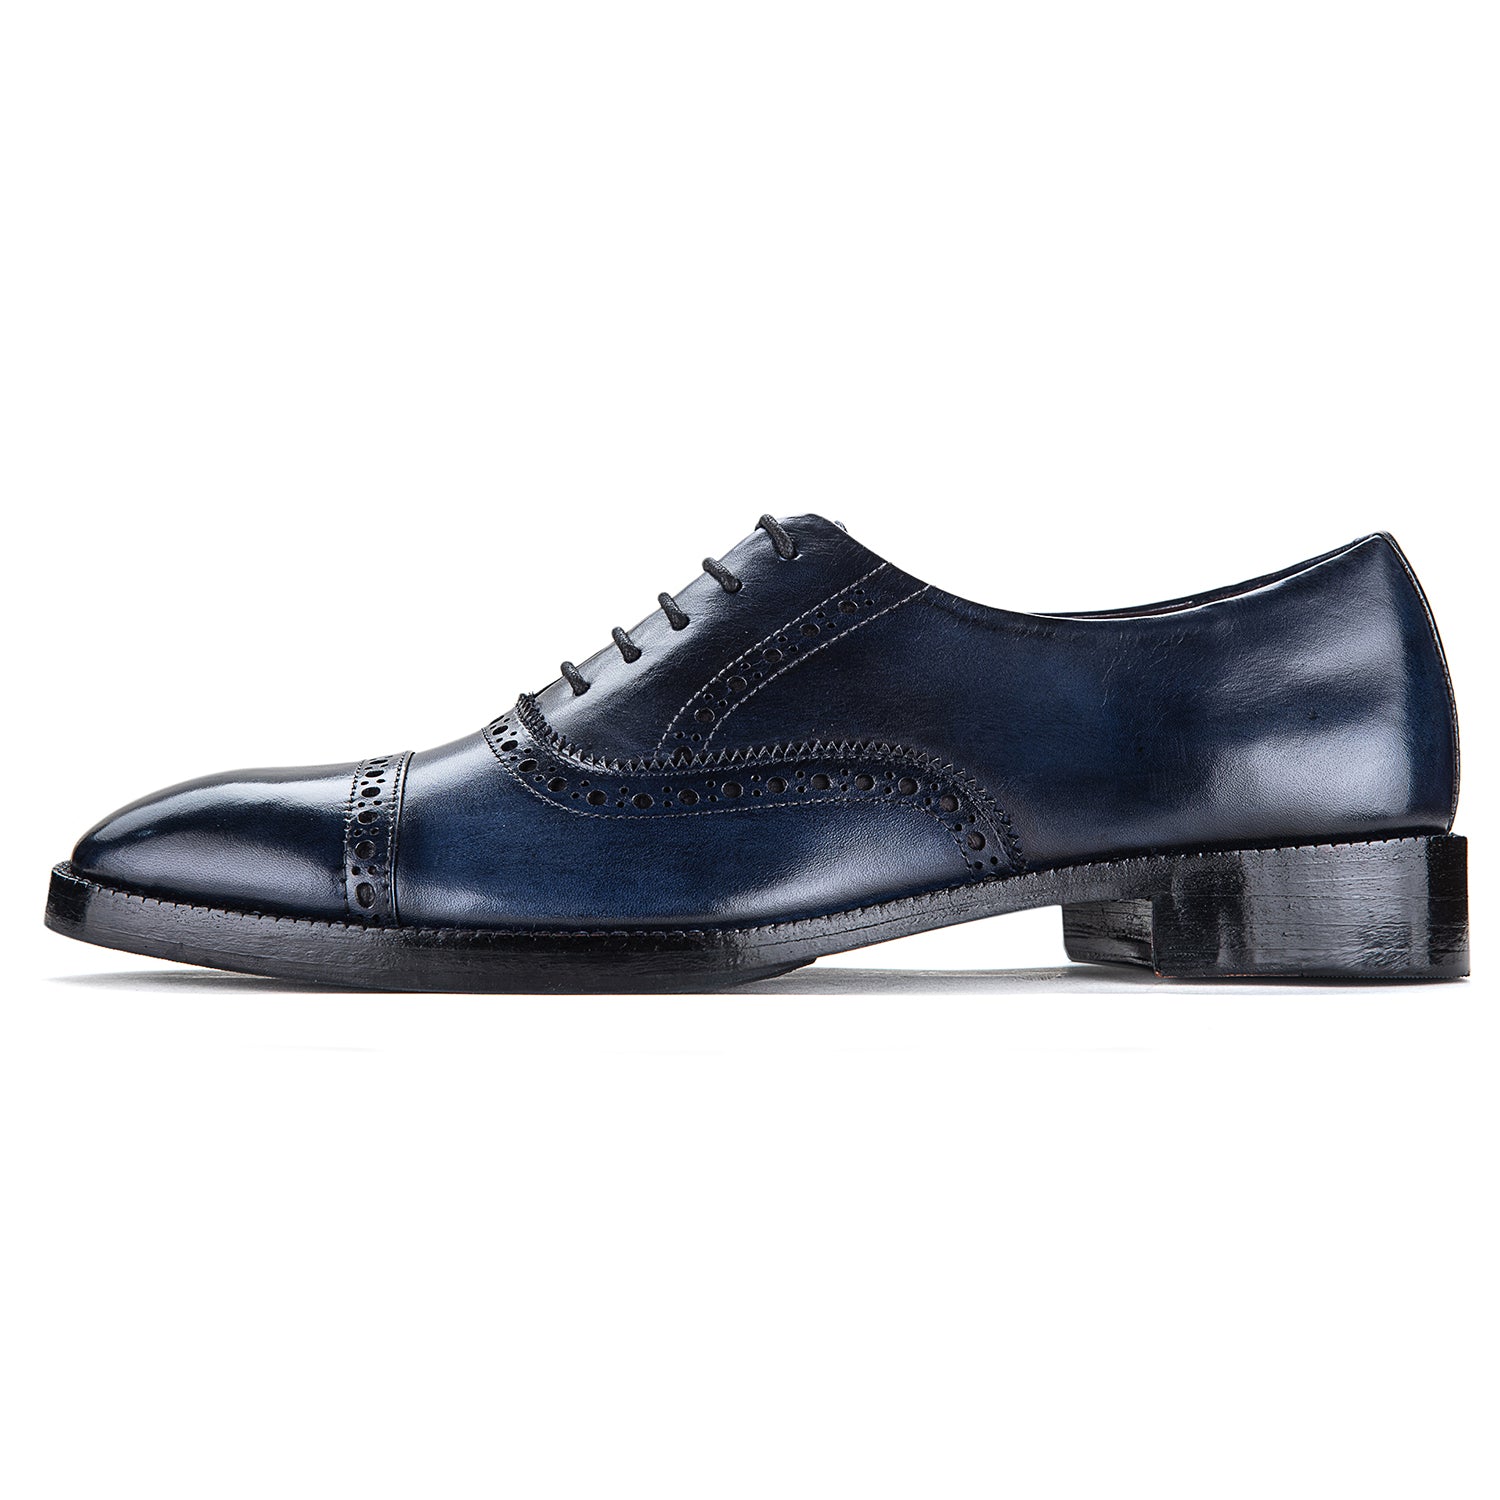 Lethato Classic Captoe Oxford - Wine Red UK 7 / US 7.5 – 8 / Euro 41 / Wine Red